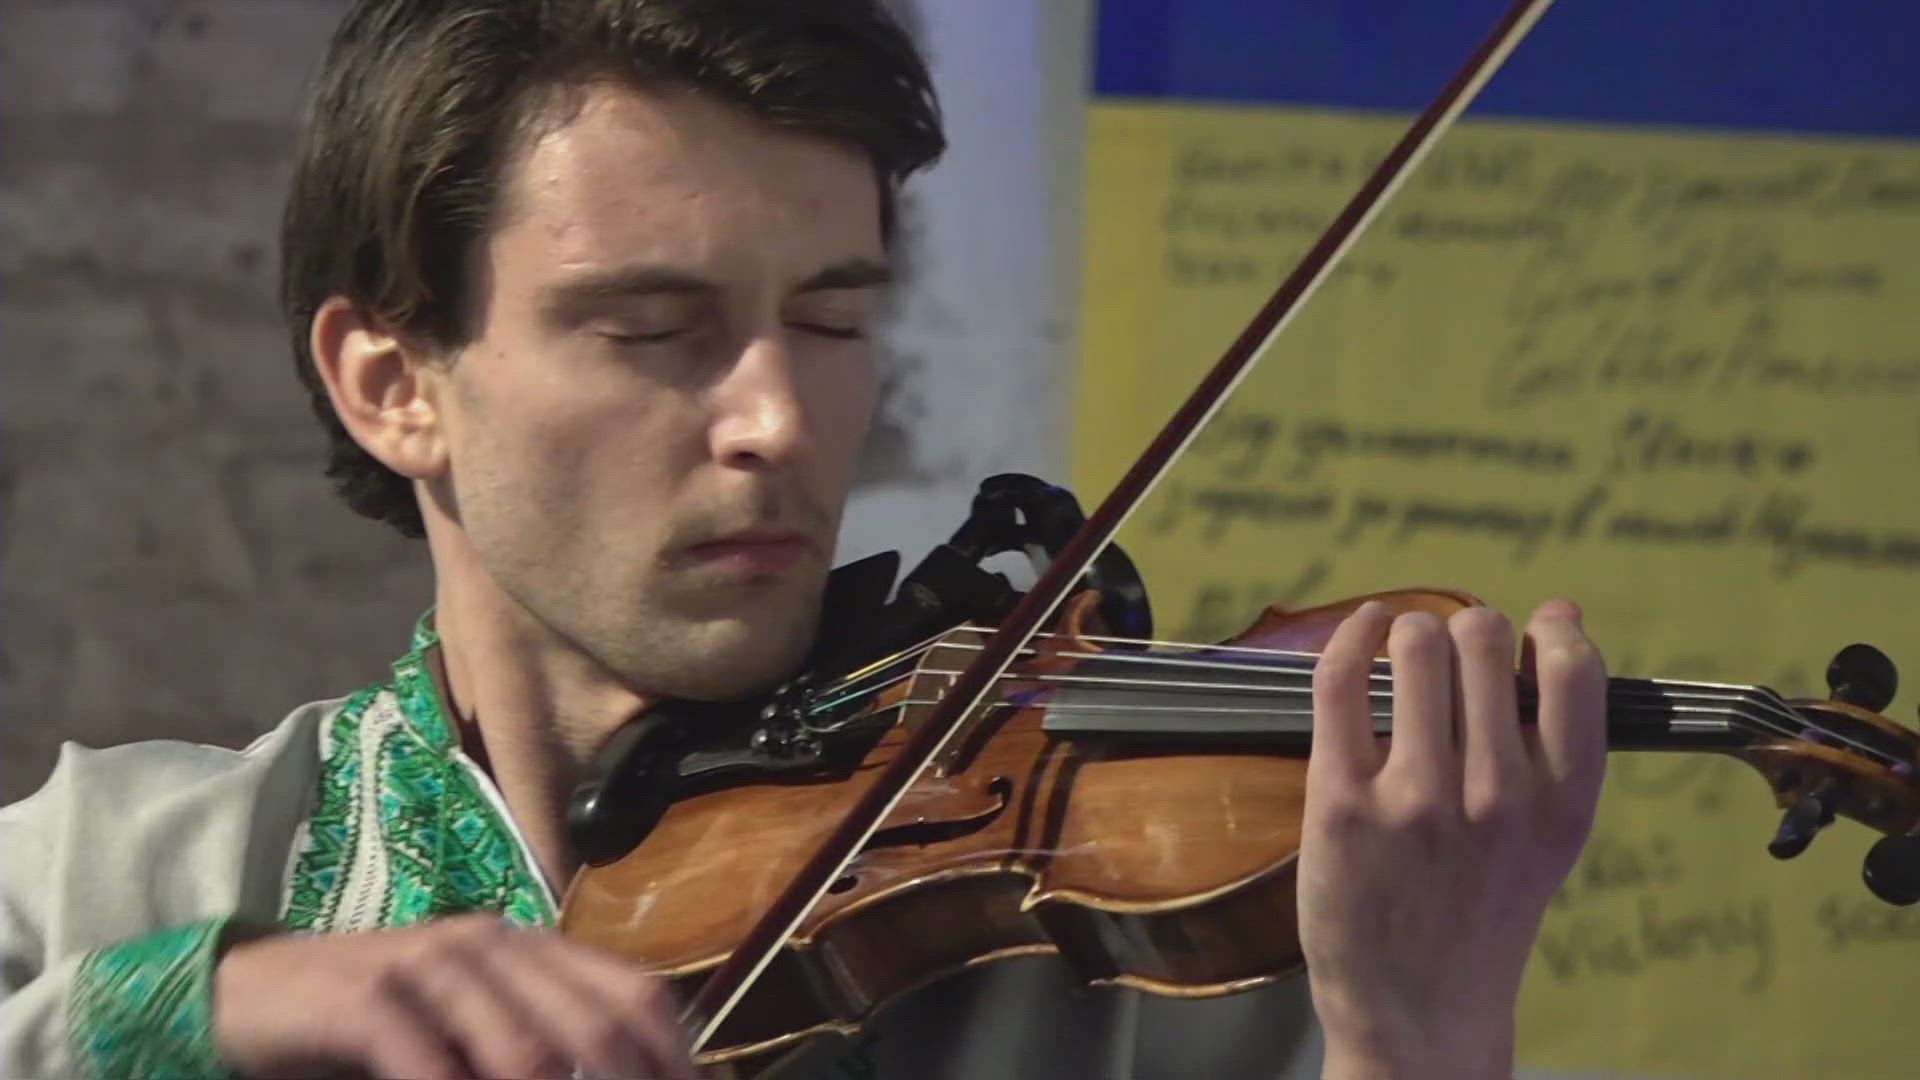 Marki Lukyniuk is a master of the violin, spreading his music in the streets of Knoxville and in the halls of the University of Tennessee for around two years.